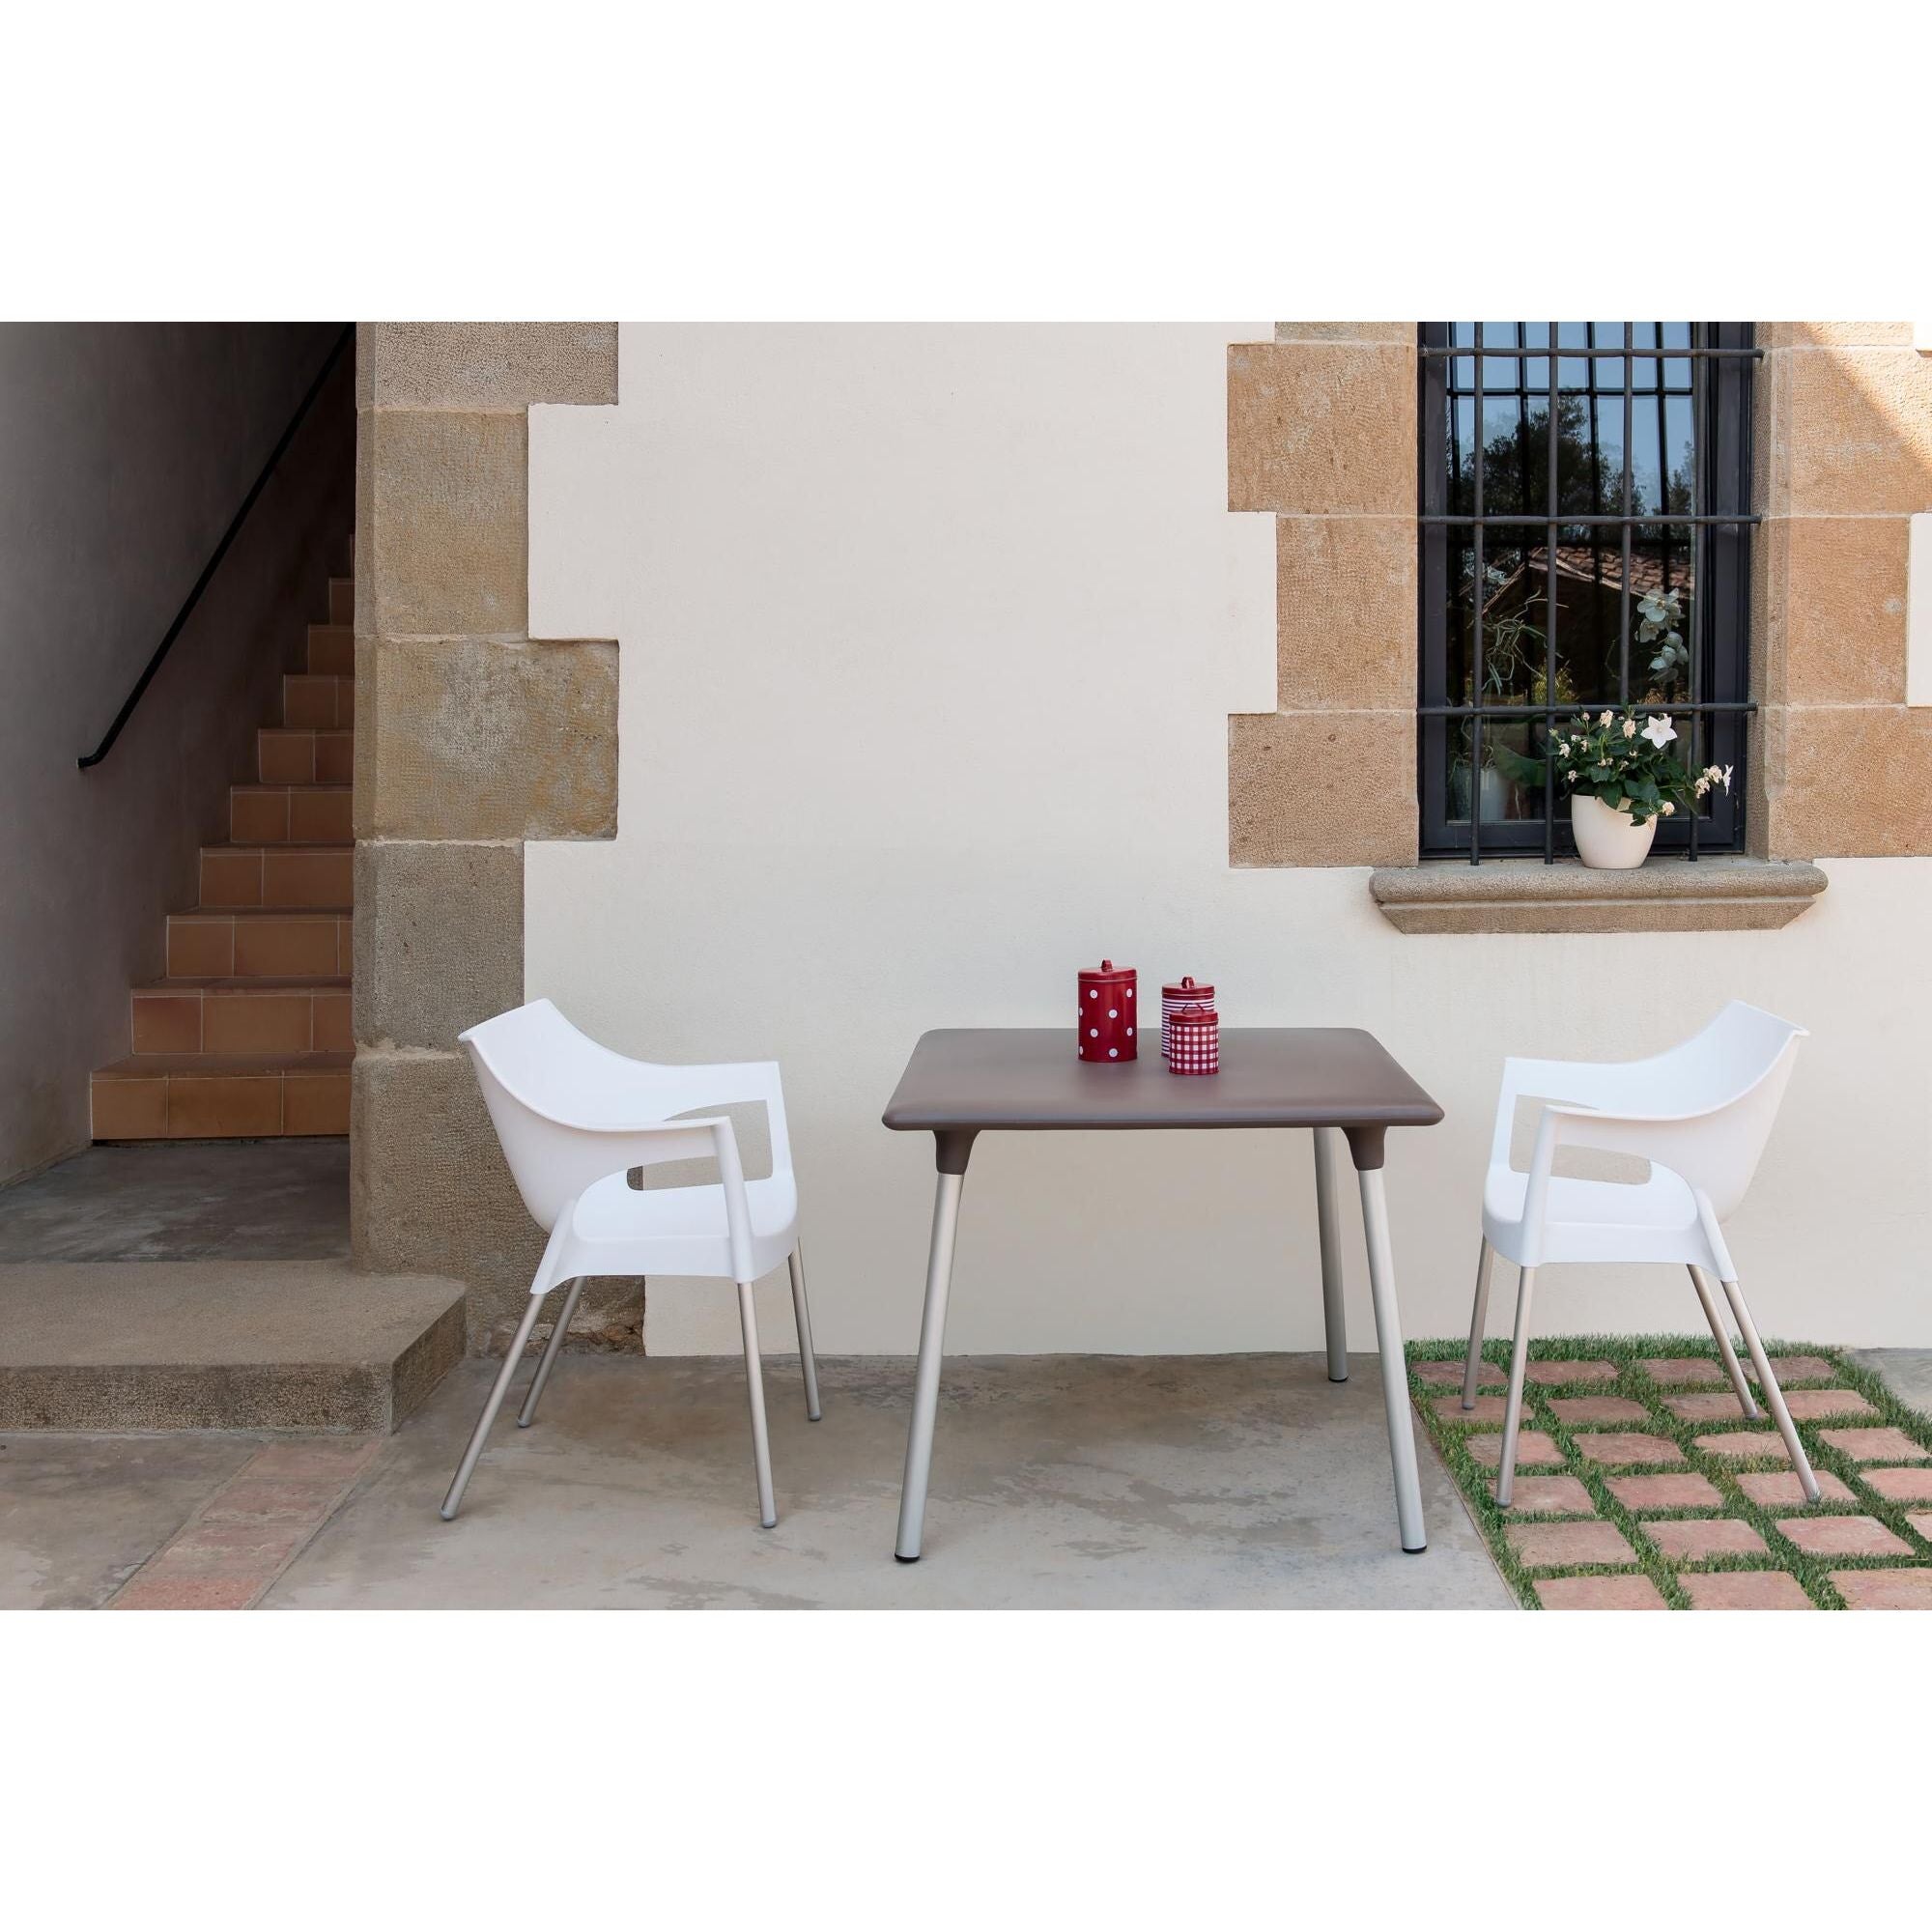 Resol new flash square table indoors, outdoor 90x90 sand